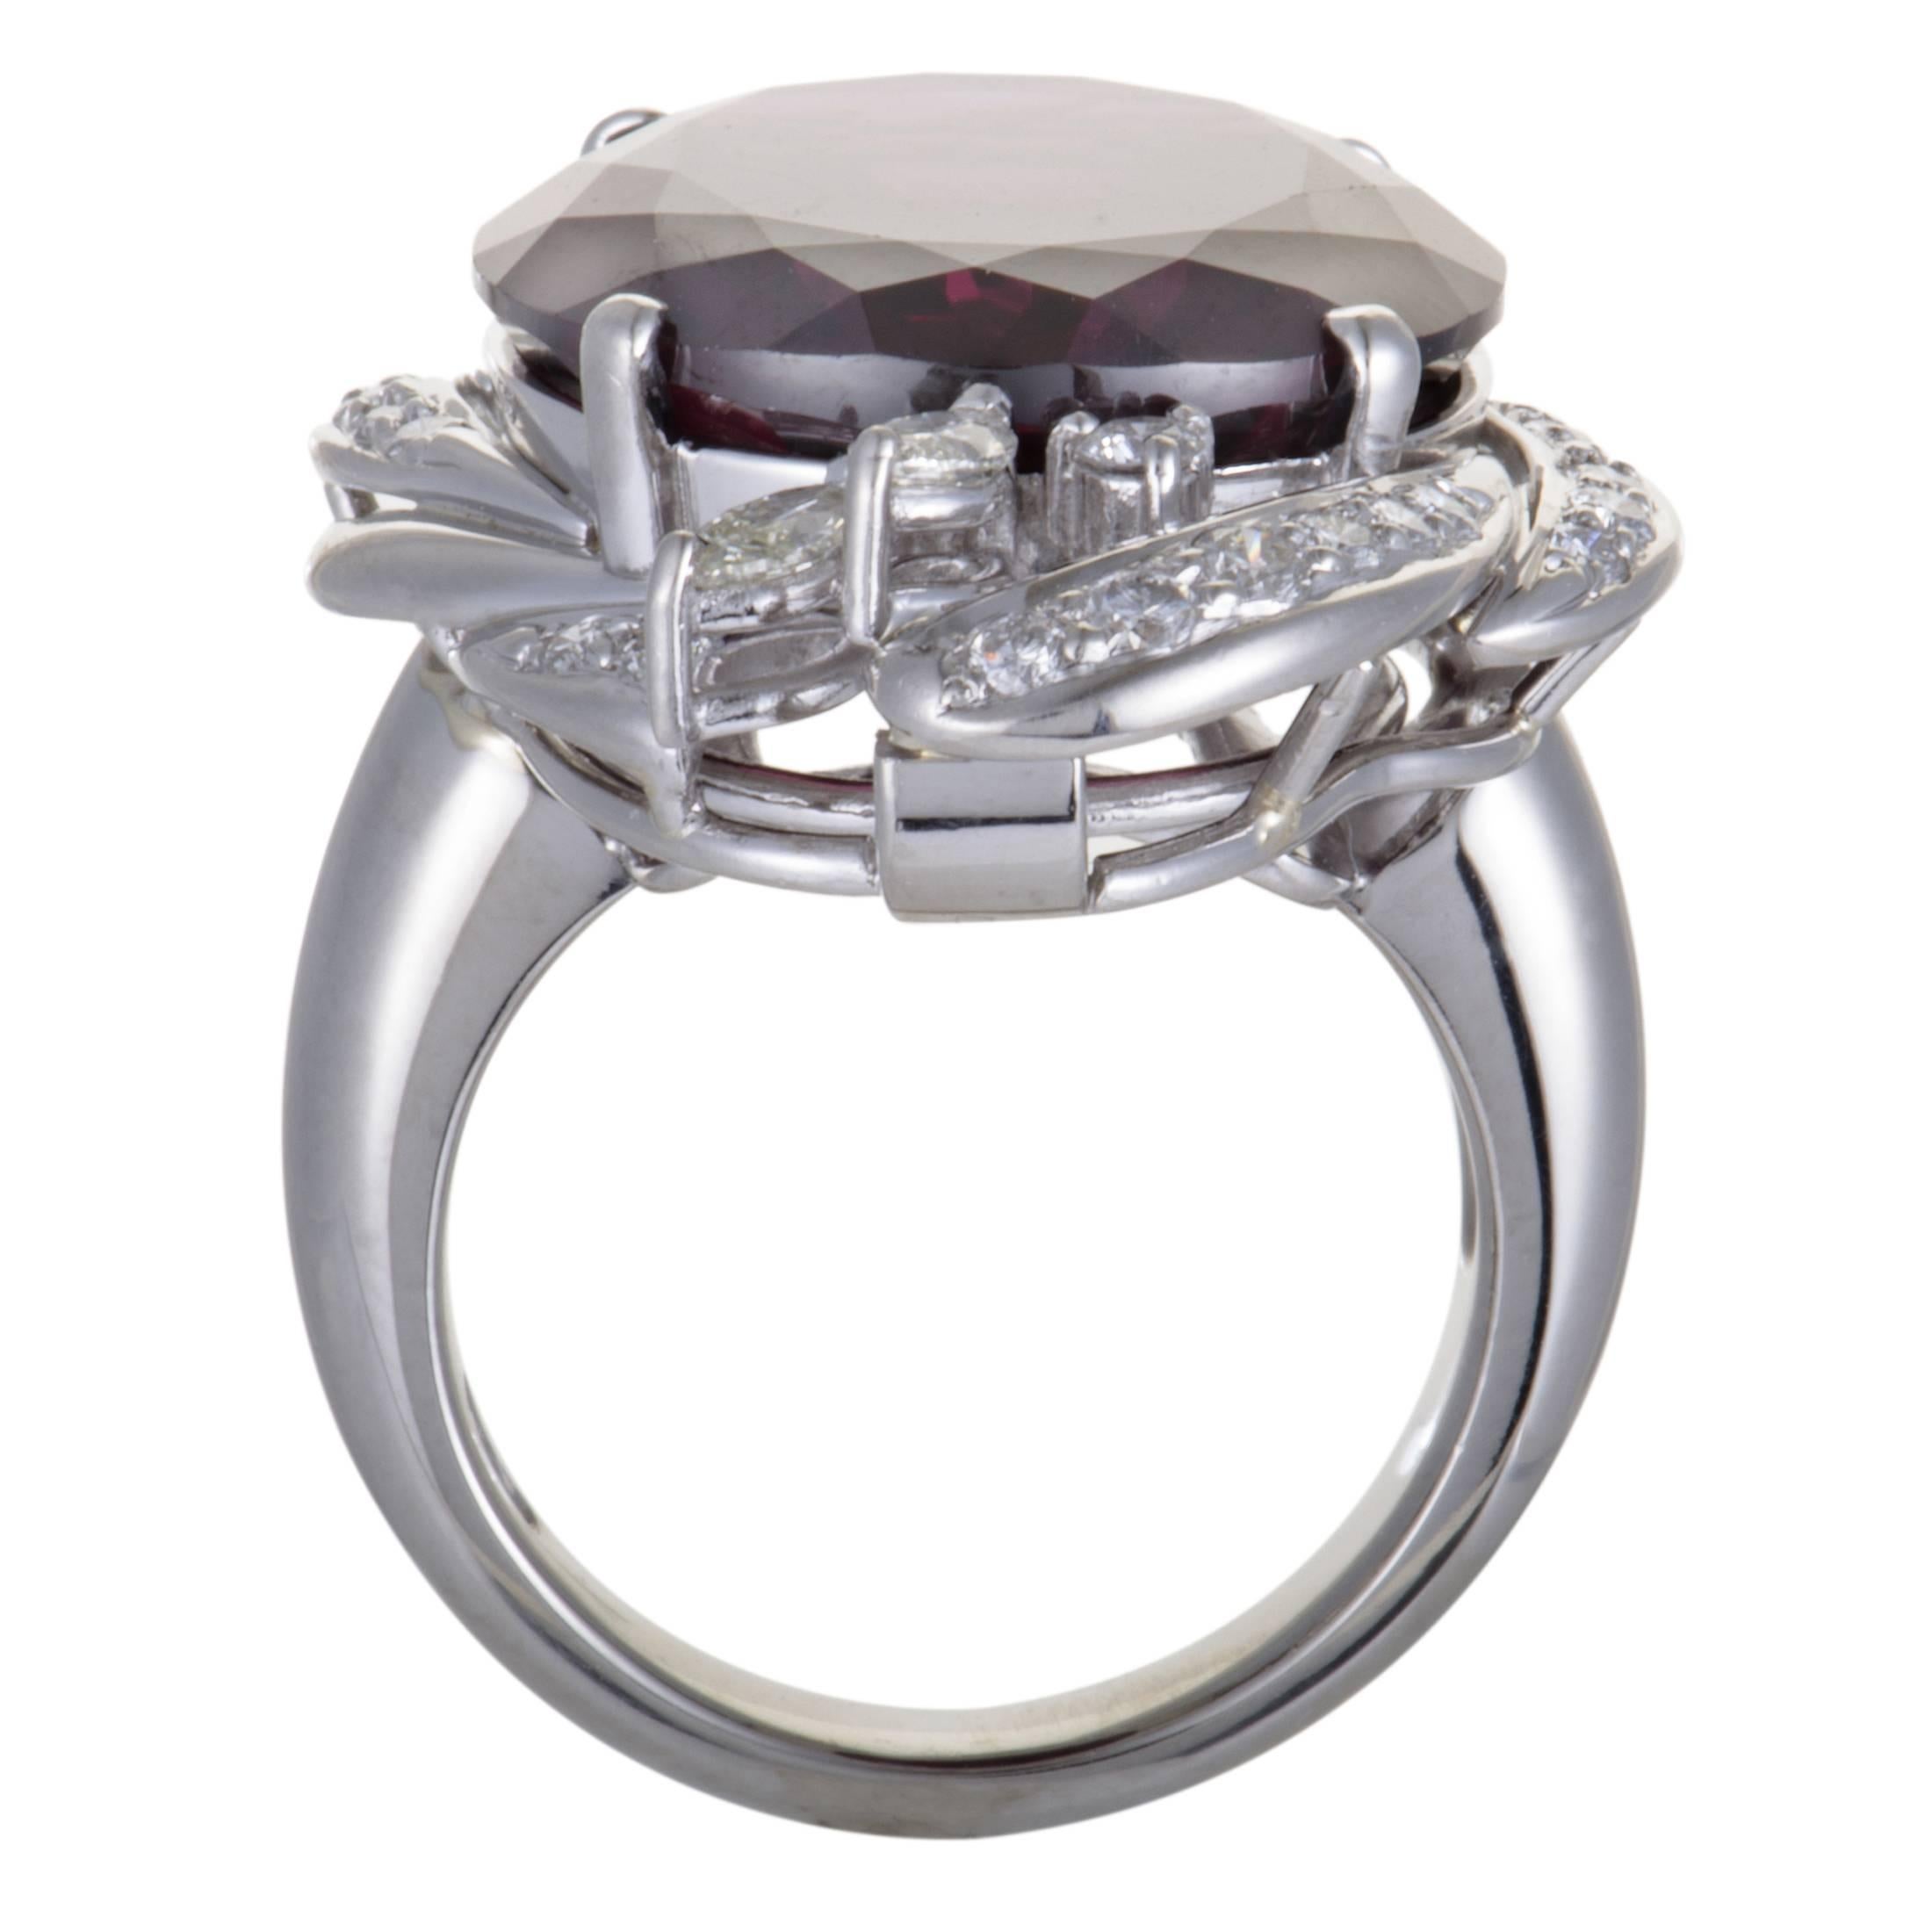 This fascinating ring is an item of prestigious quality and refined aesthetic style. The fabulous shimmer of platinum in its design is perfectly complemented with the timeless resplendence of  diamonds, weighing 1.10ct, and a spectacular purple